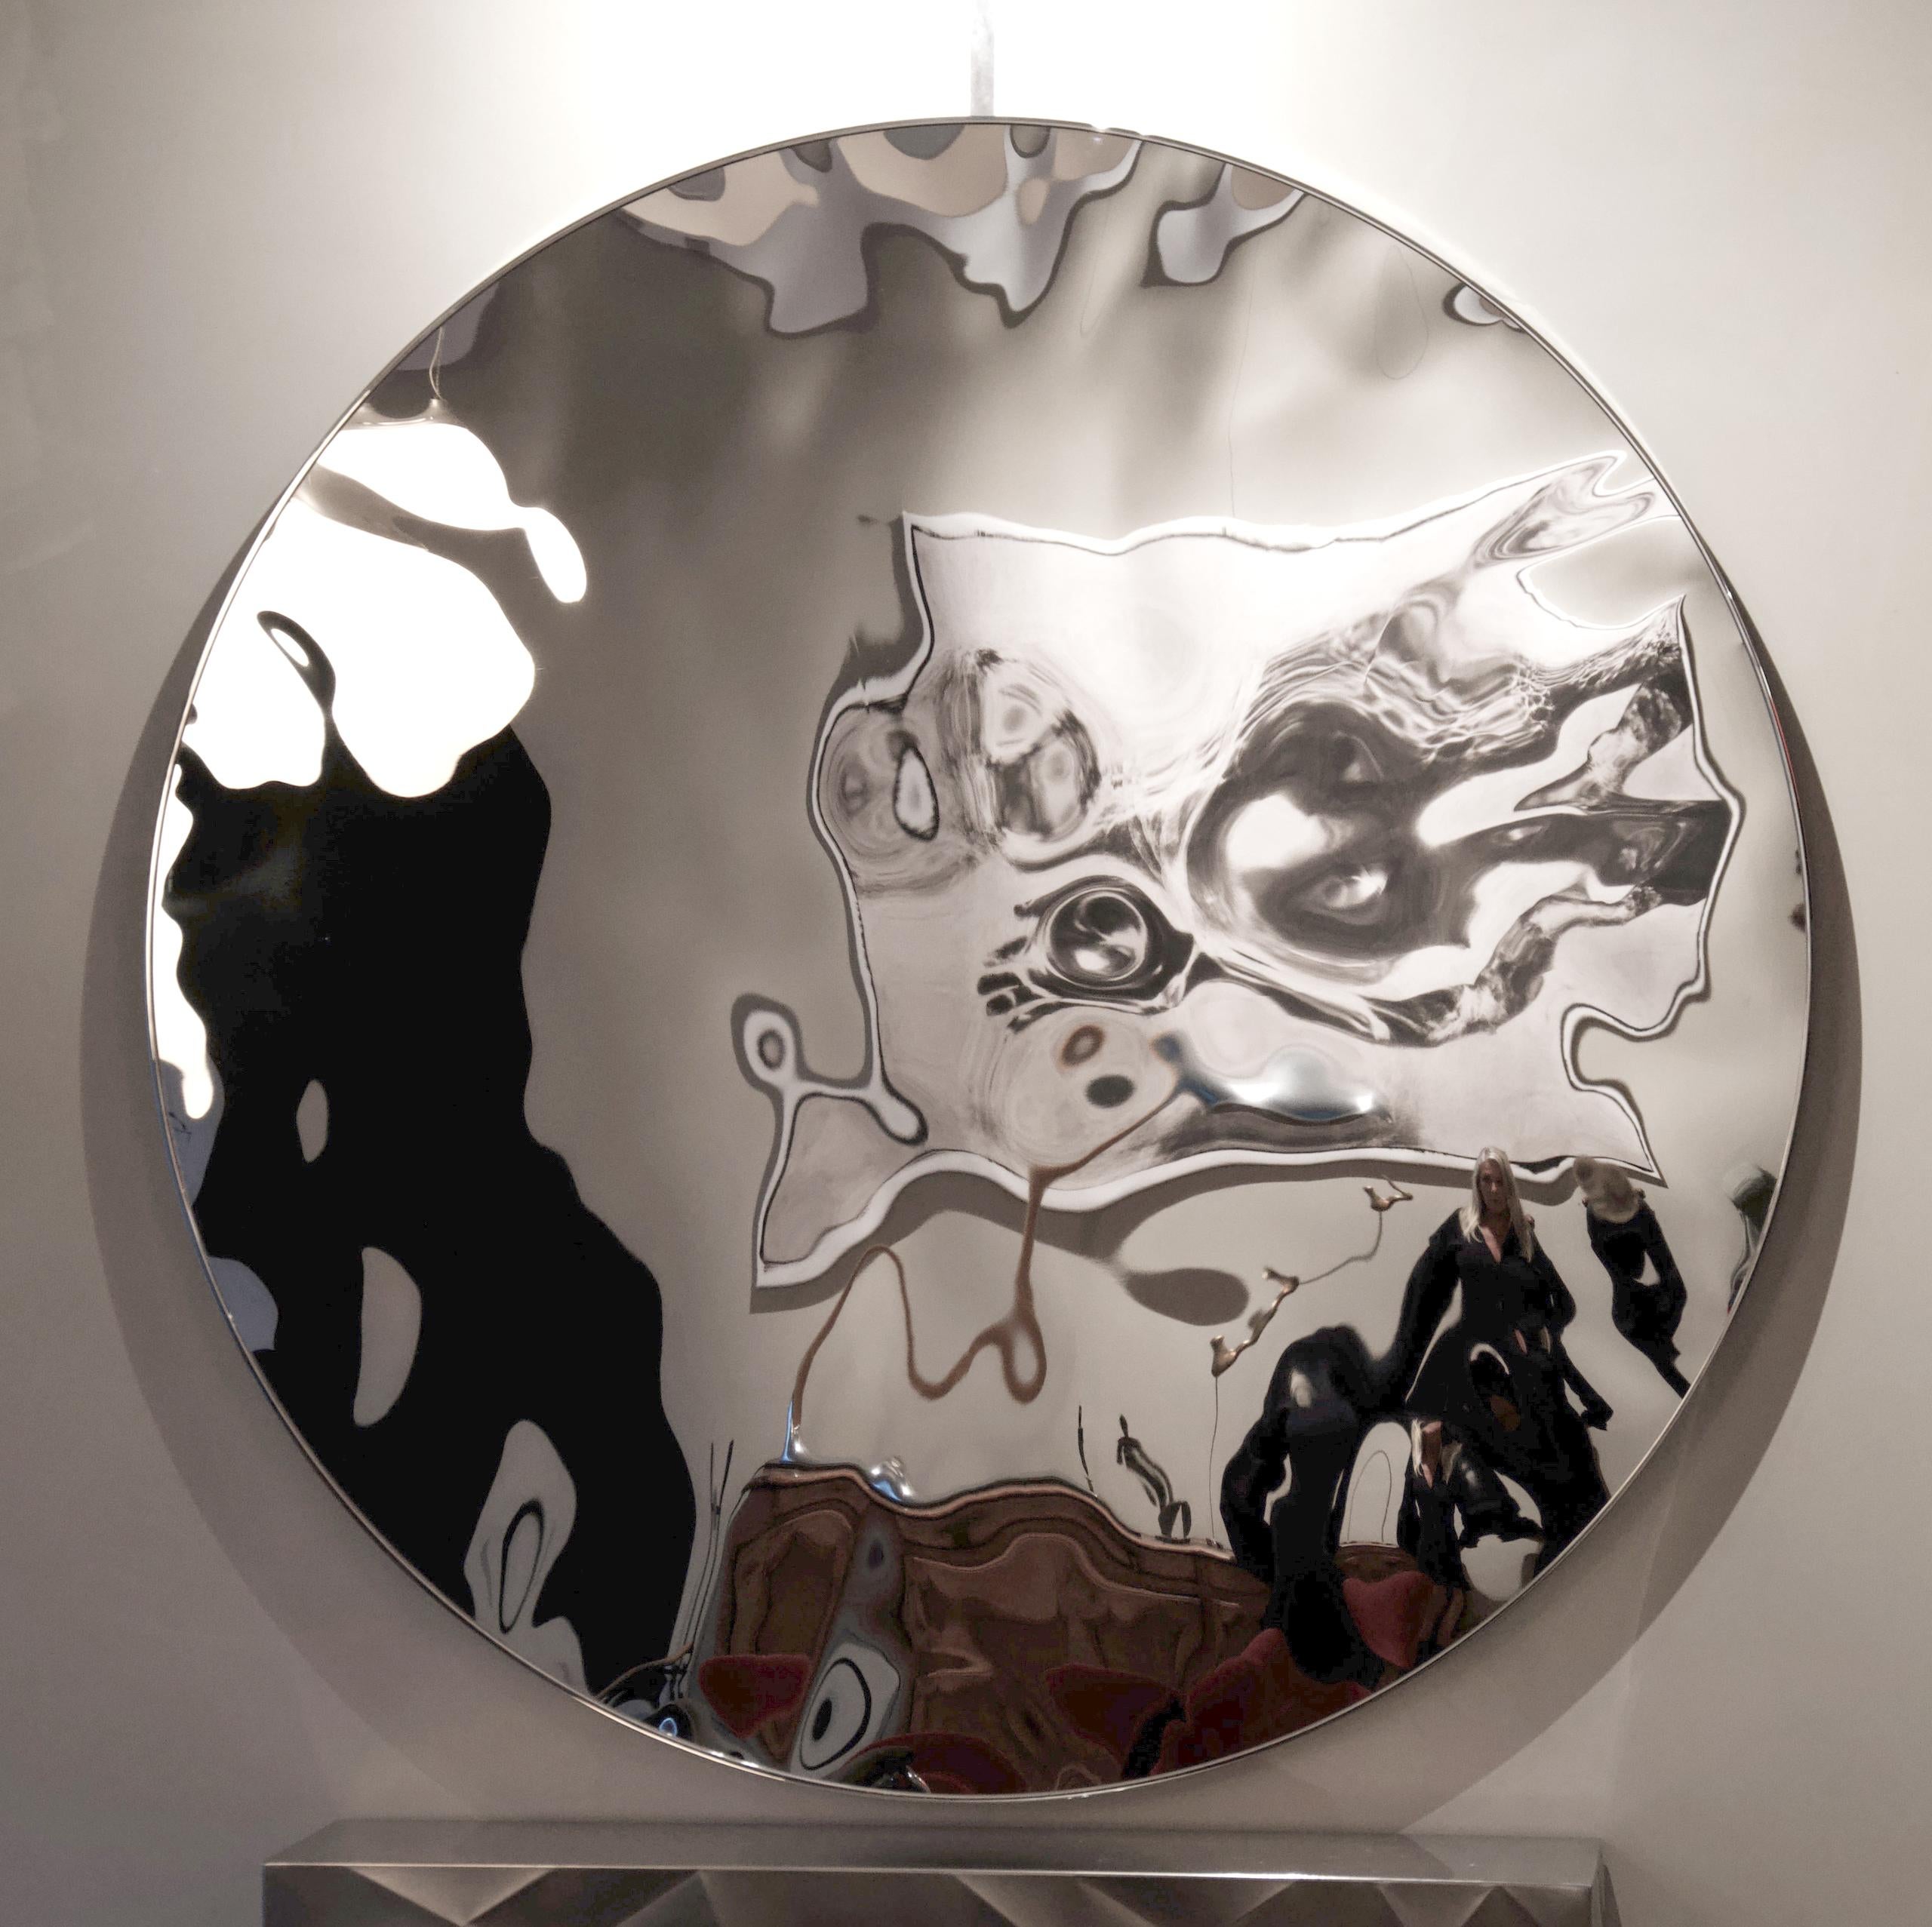 “Shattered” wall mirror IV is a unique mirror-polished stainless steel sculpture by contemporary artist Franck K, dimensions are 200 × 200 × 5 cm (78.7 × 78.7 × 2 in). 
The sculpture is signed and comes with a certificate of authenticity.
This piece